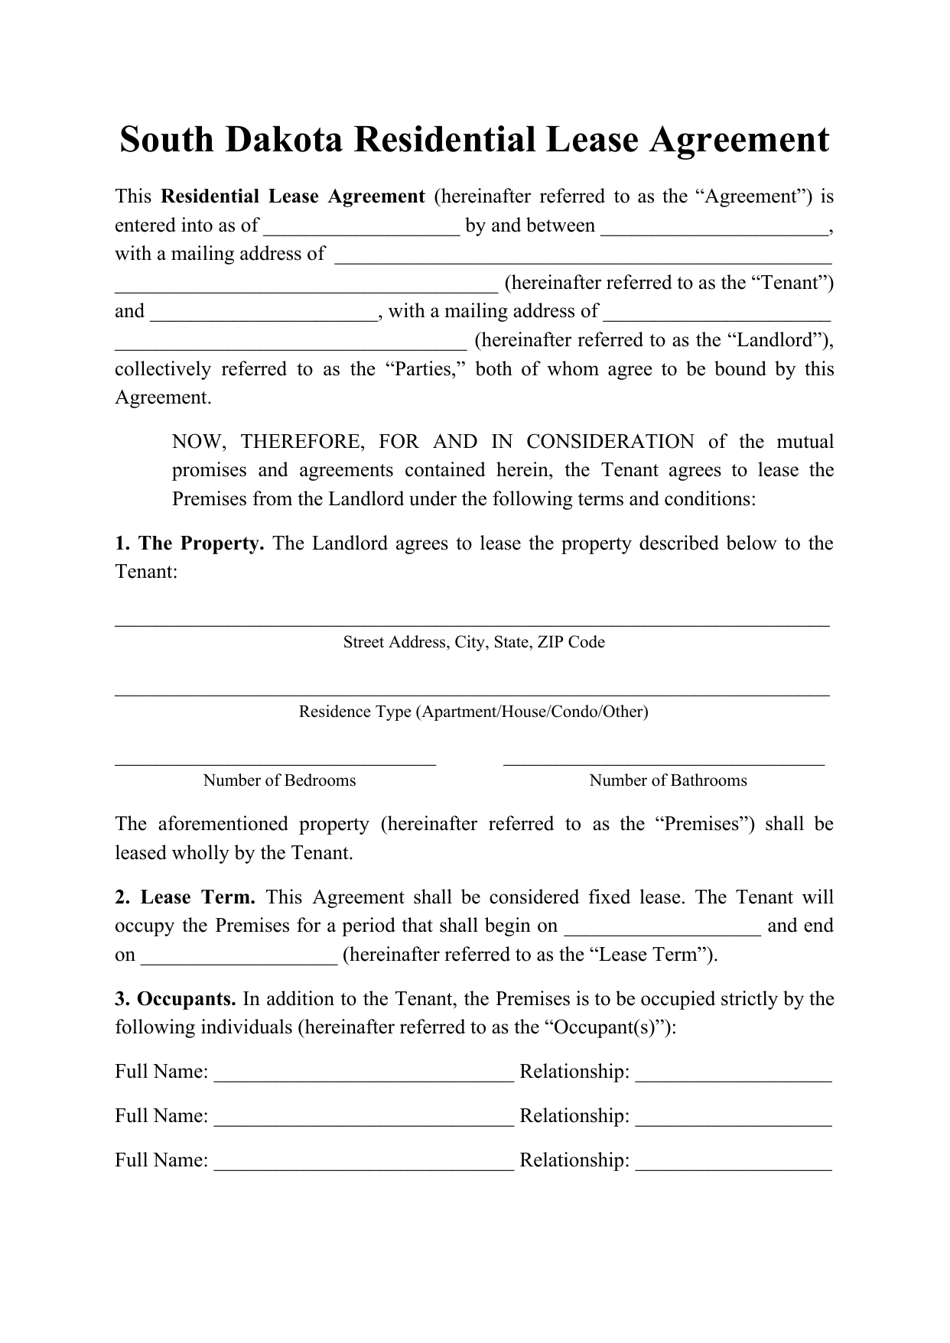 Residential Lease Agreement Template - South Dakota, Page 1